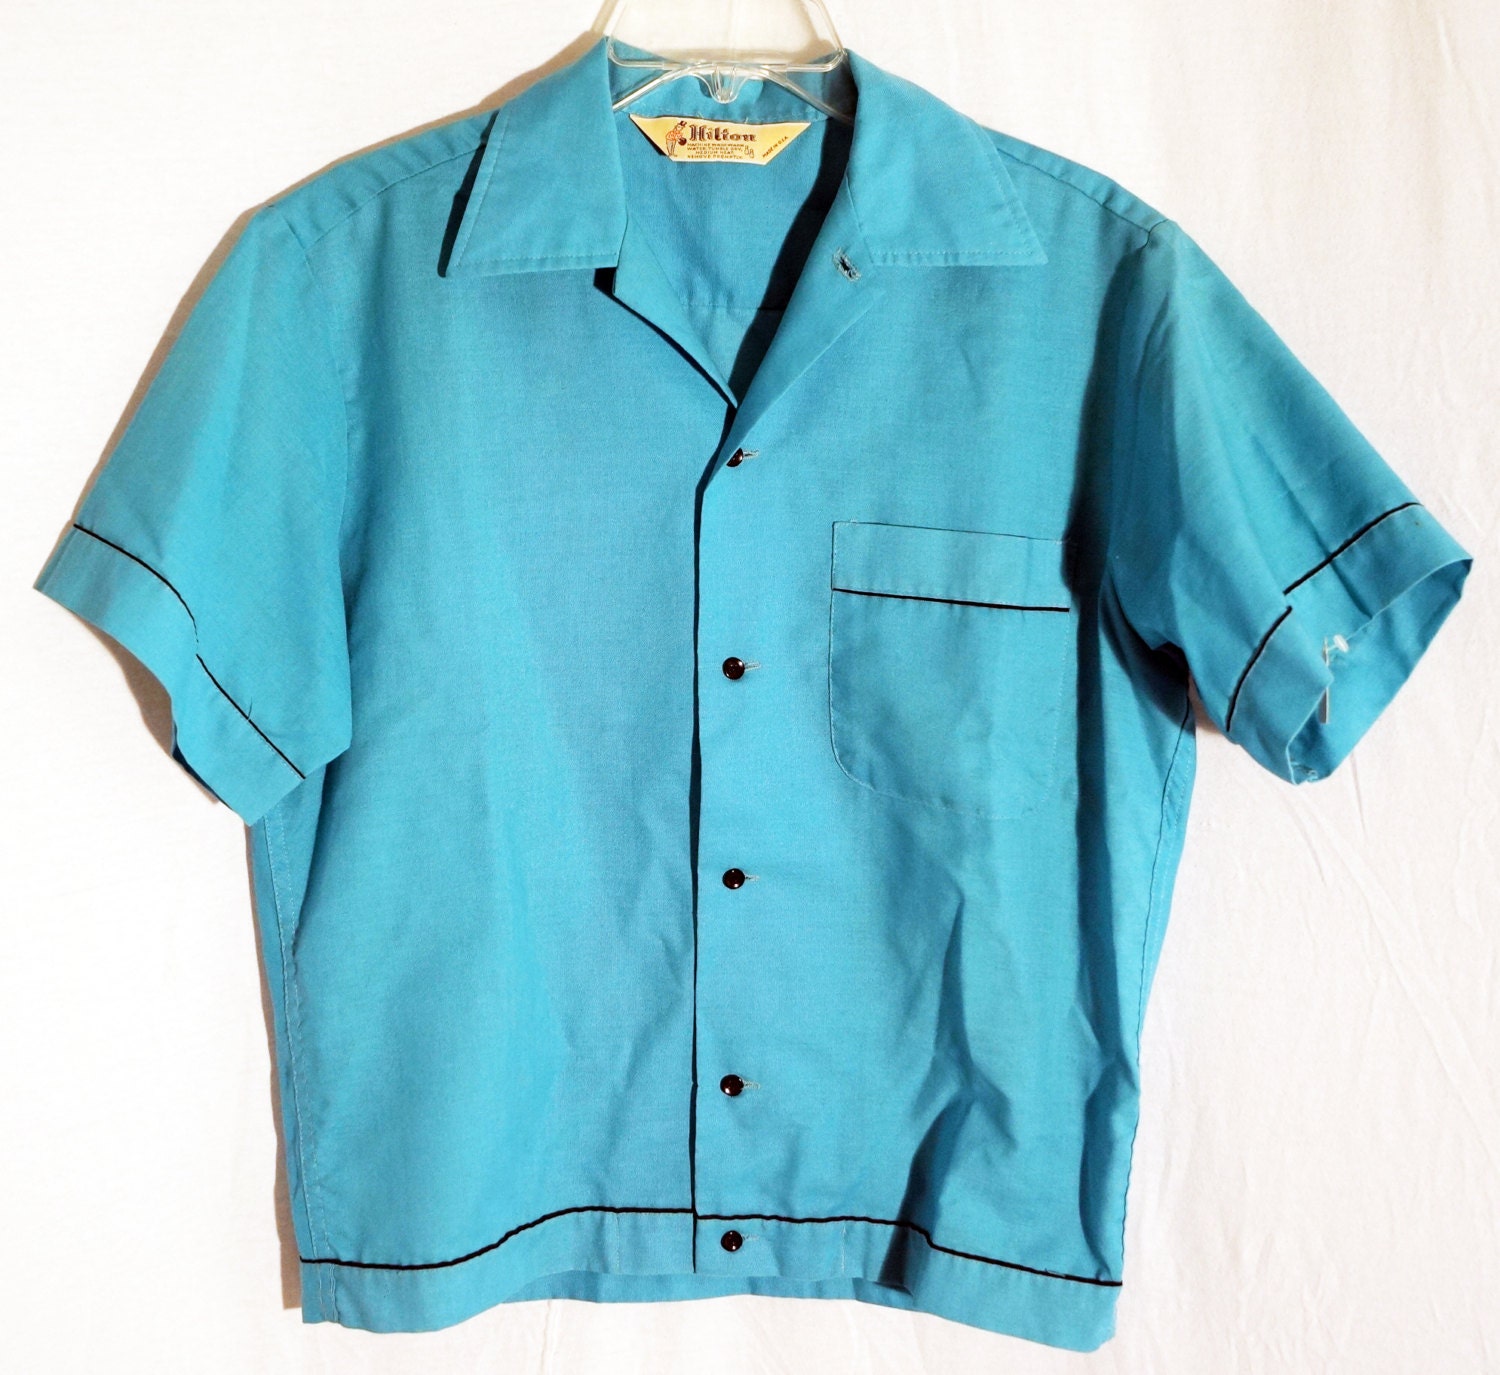 1950s Bowling Shirt Sz M by GrandFunkeVintage on Etsy